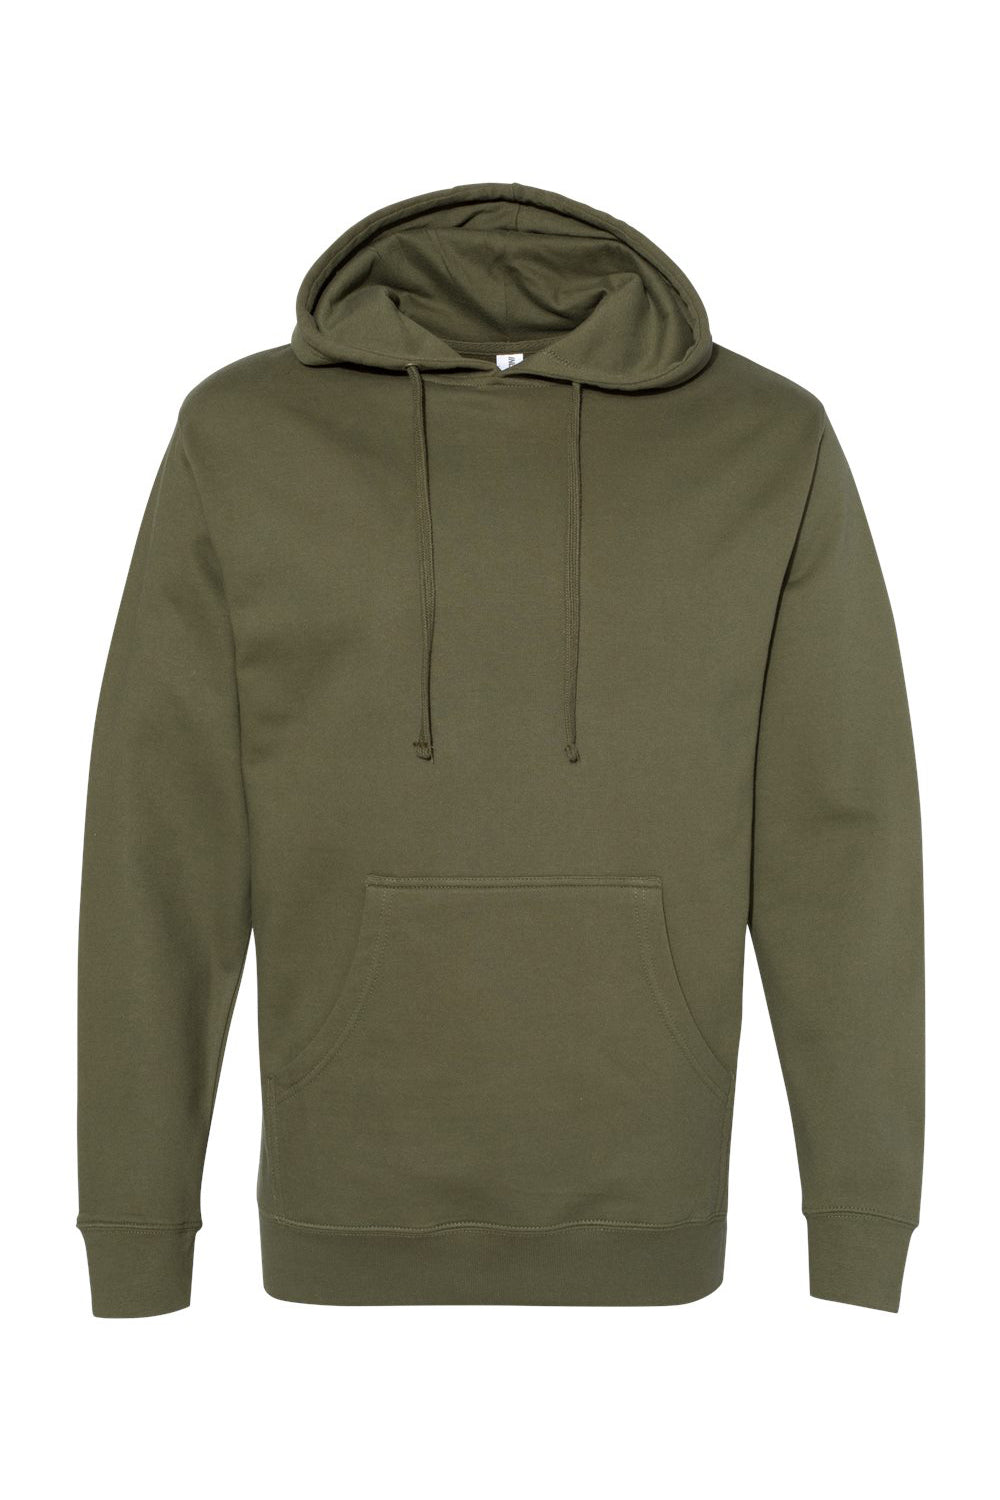 Independent Trading Co. SS4500 Mens Hooded Sweatshirt Hoodie Army Green Flat Front